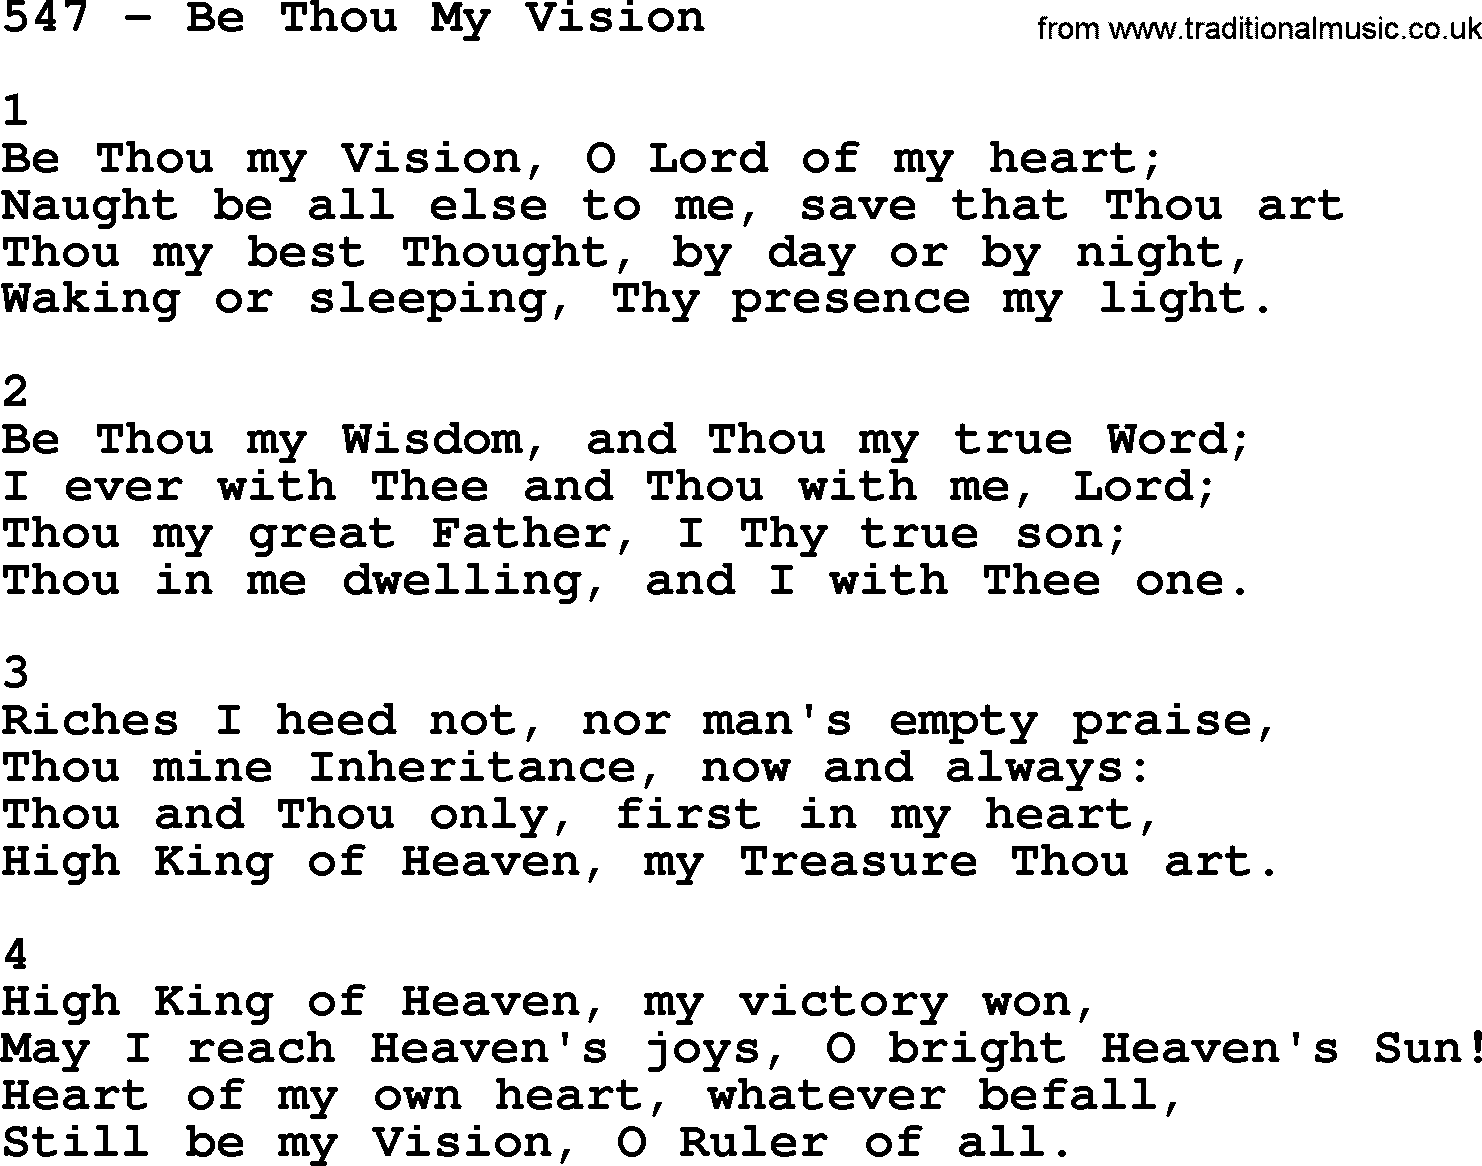 Complete Adventis Hymnal, title: 547-Be Thou My Vision, with lyrics, midi, mp3, powerpoints(PPT) and PDF,